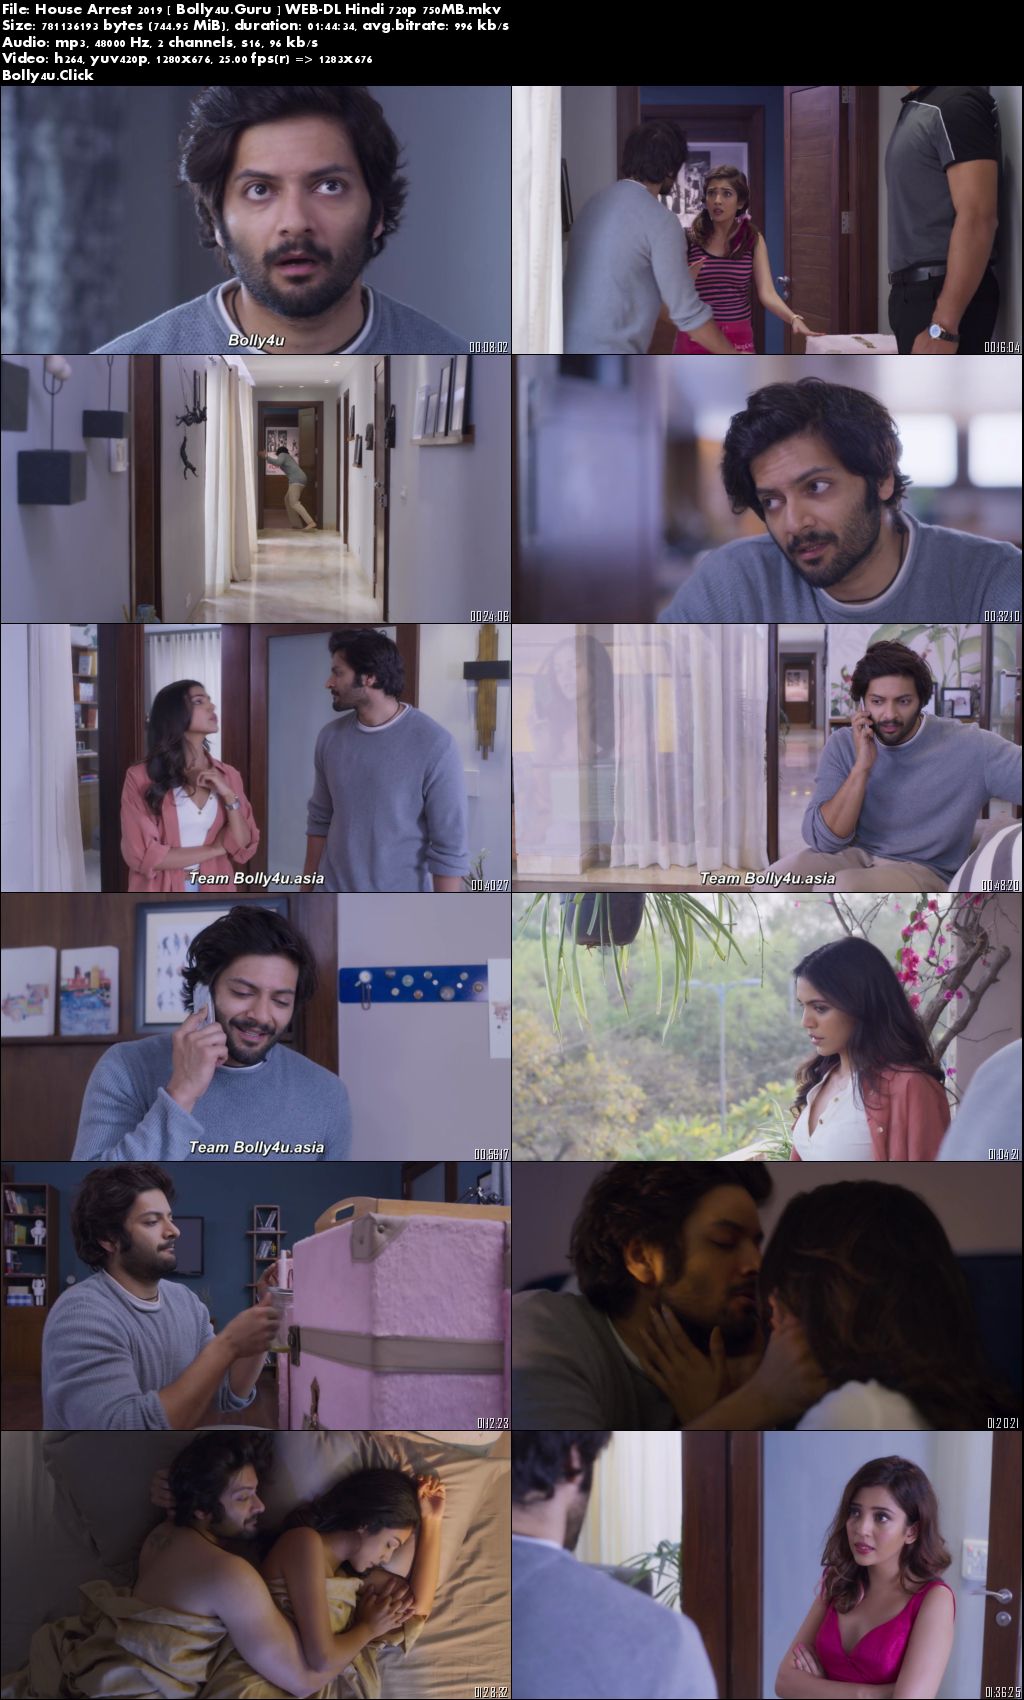 House Arrest 2019 WEB-DL 750Mb Full Hindi Movie Download 720p